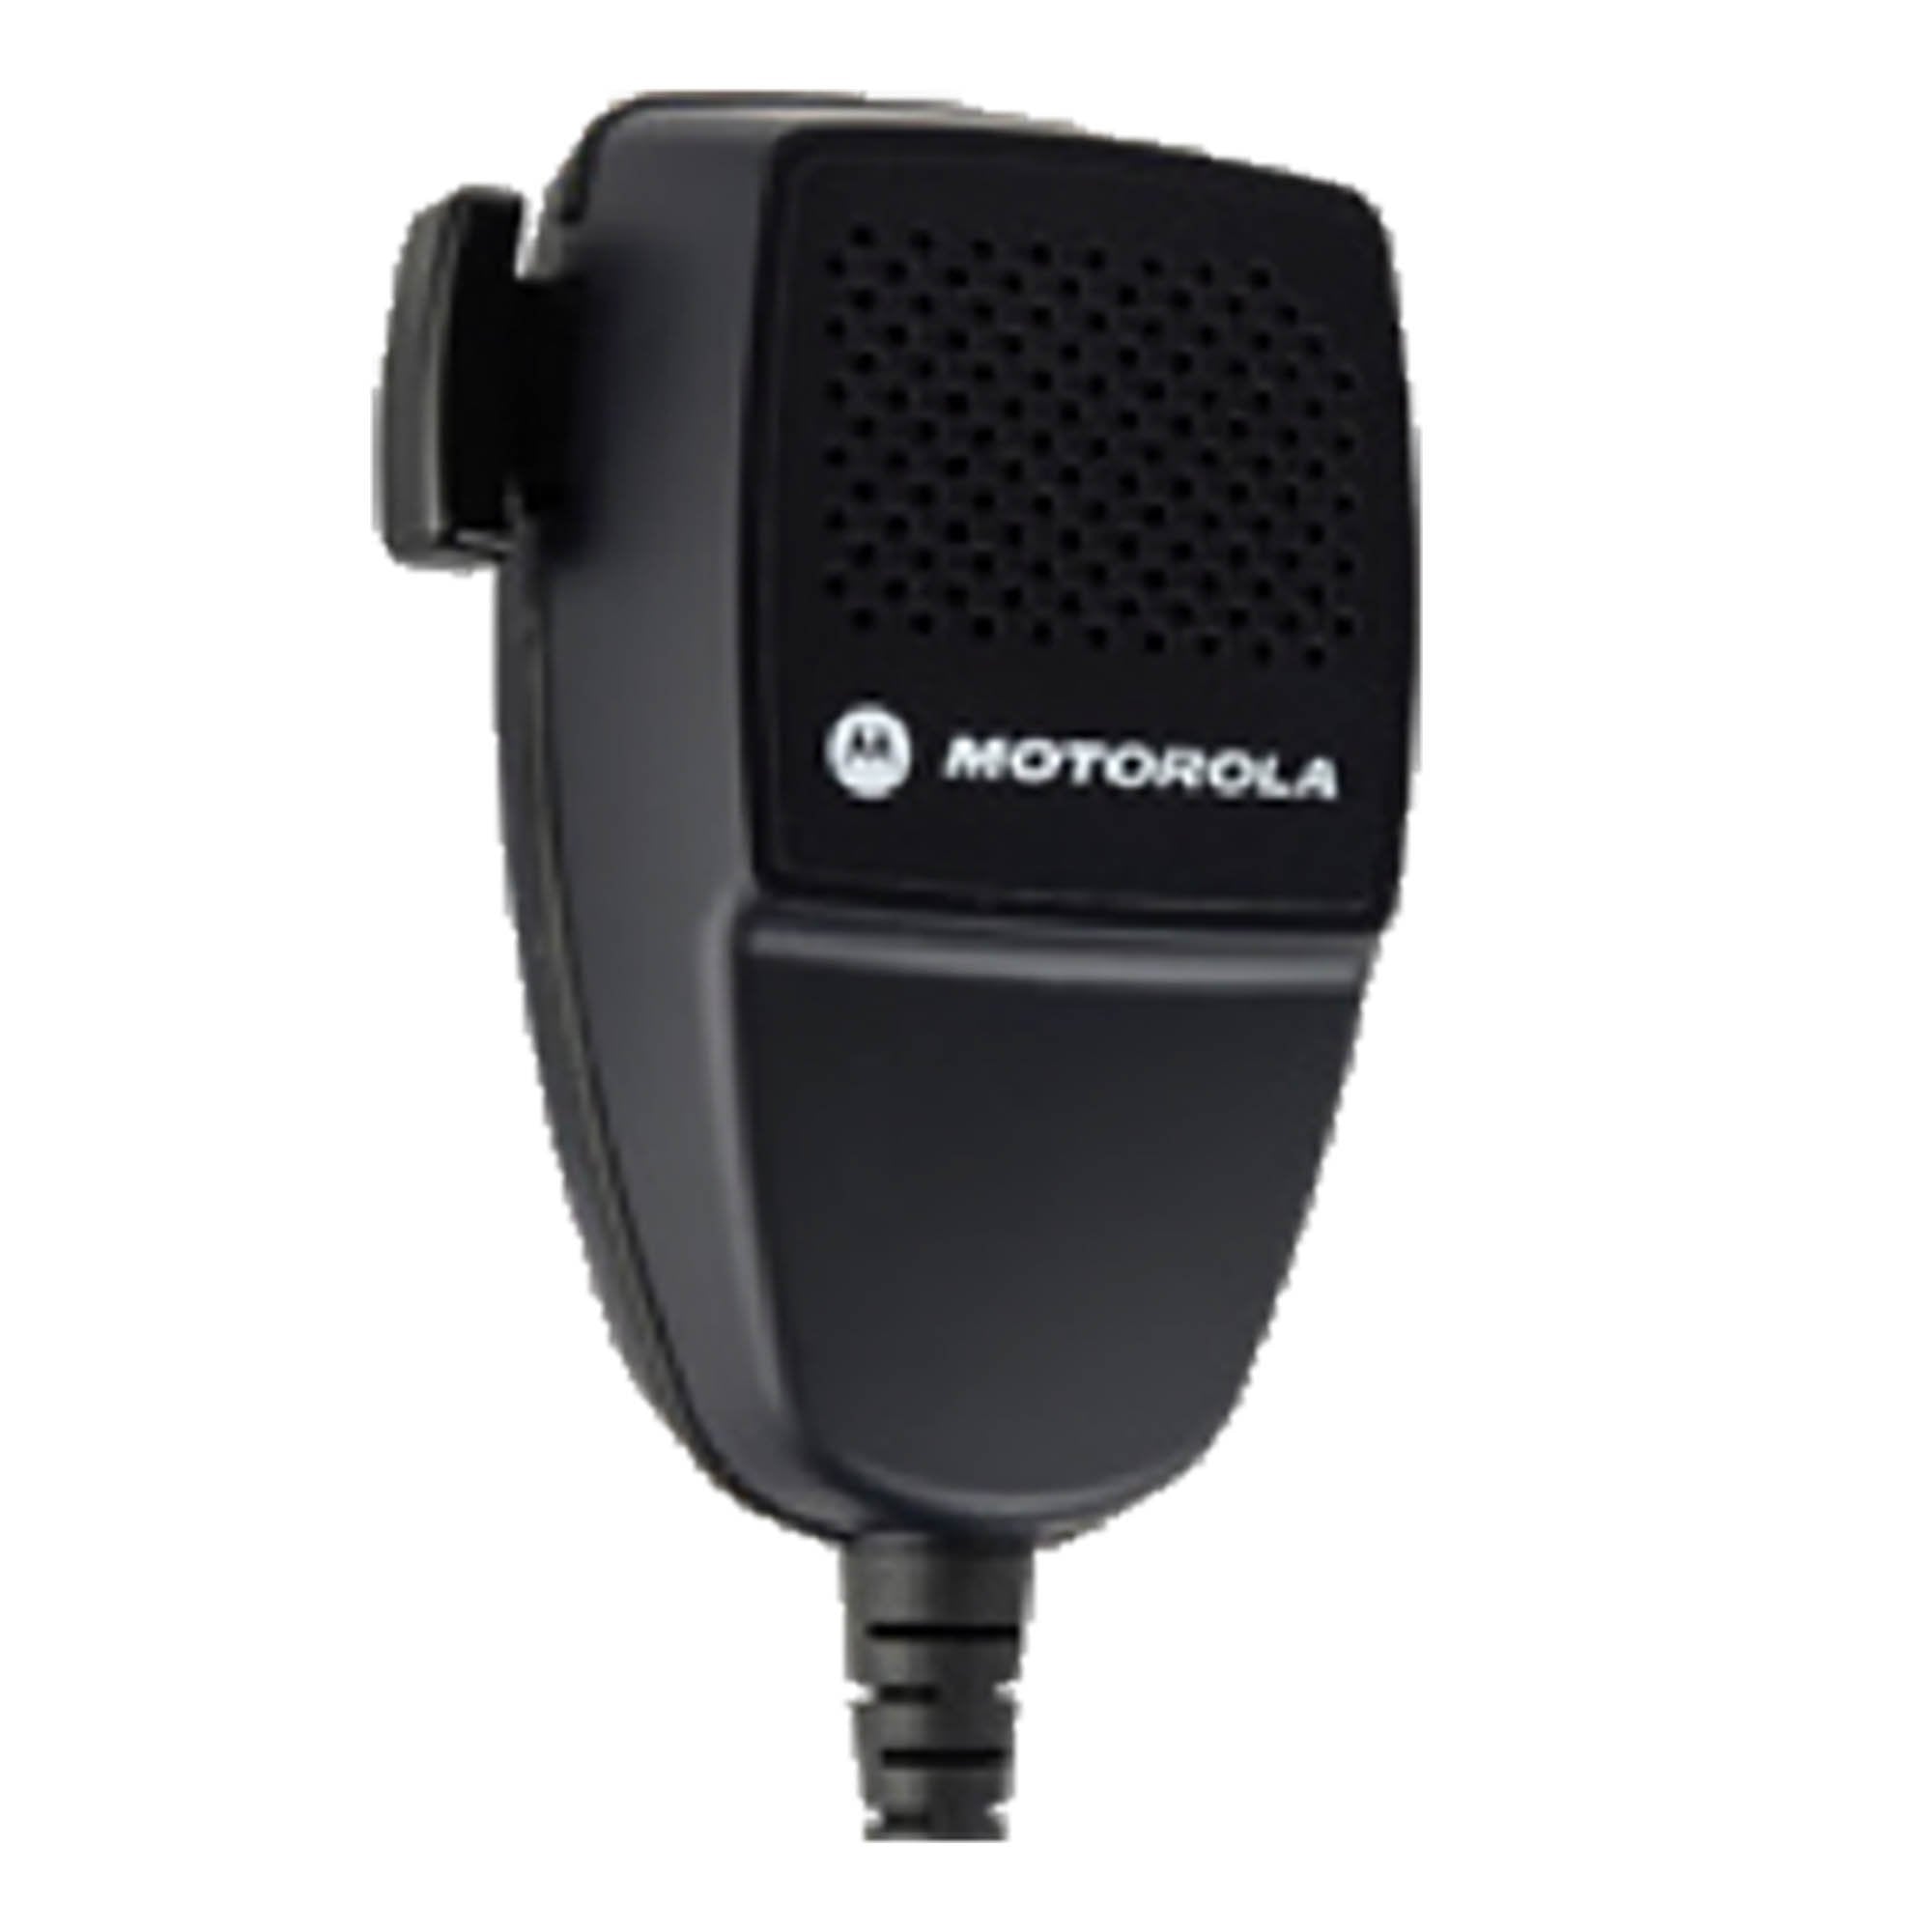 PMMN4129 Wideband Compact Mobile Microphone